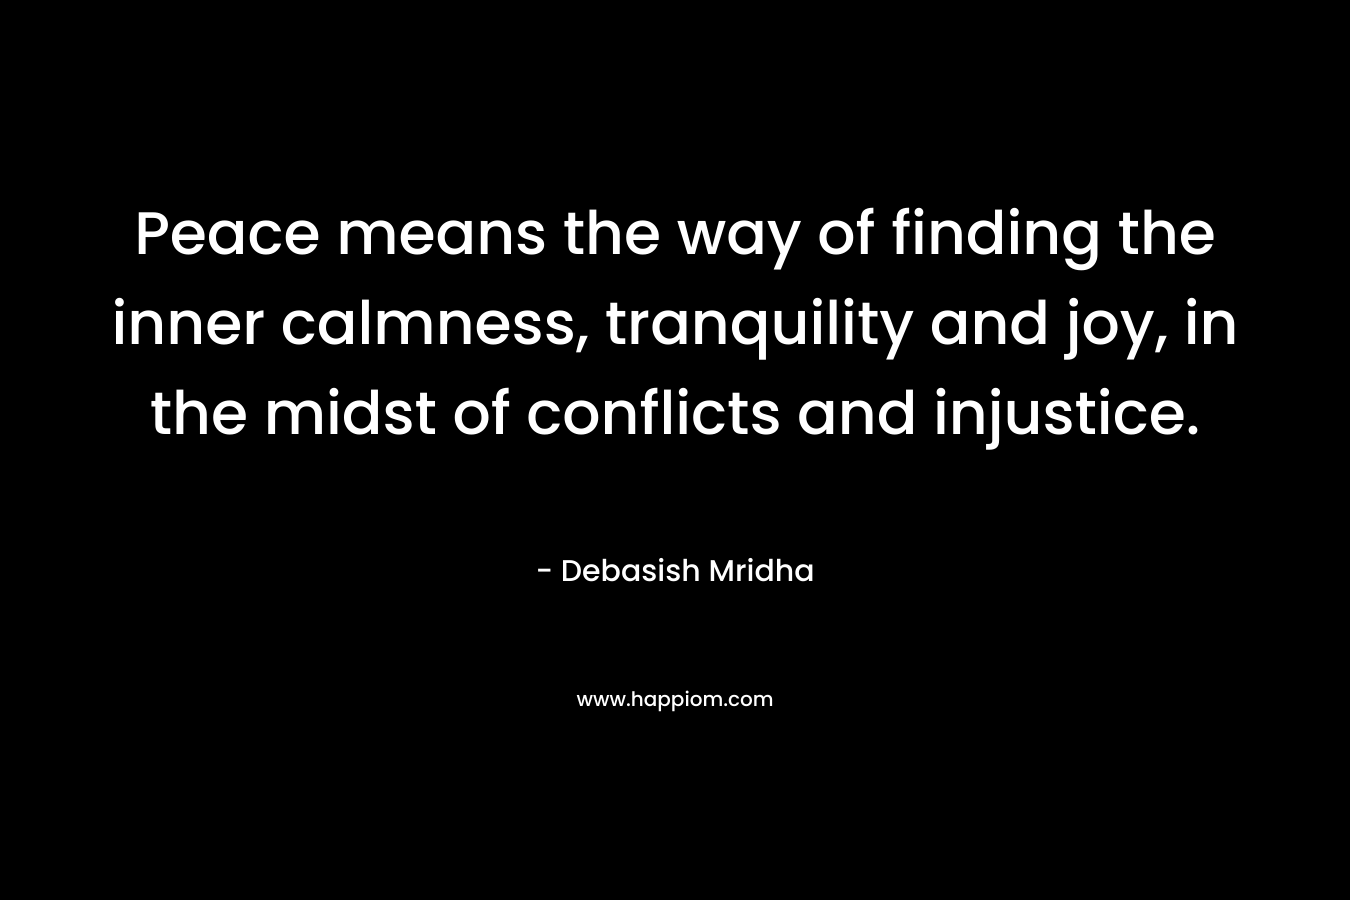 Peace means the way of finding the inner calmness, tranquility and joy, in the midst of conflicts and injustice. – Debasish Mridha